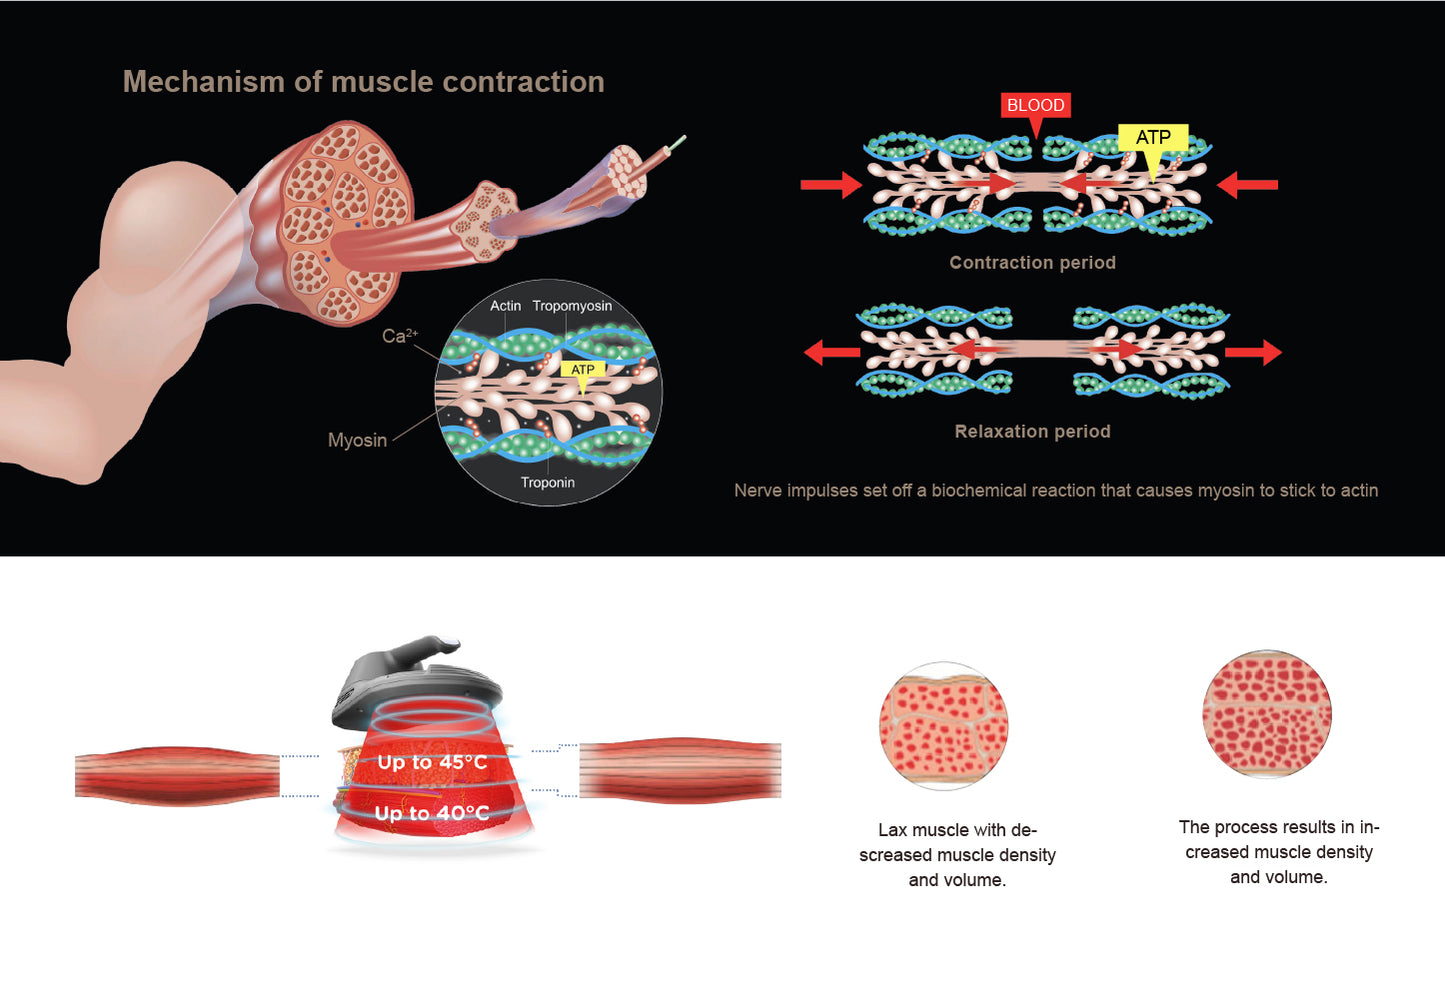 Mechanism of muscle contraction is applied for fat reduction and muscle building 